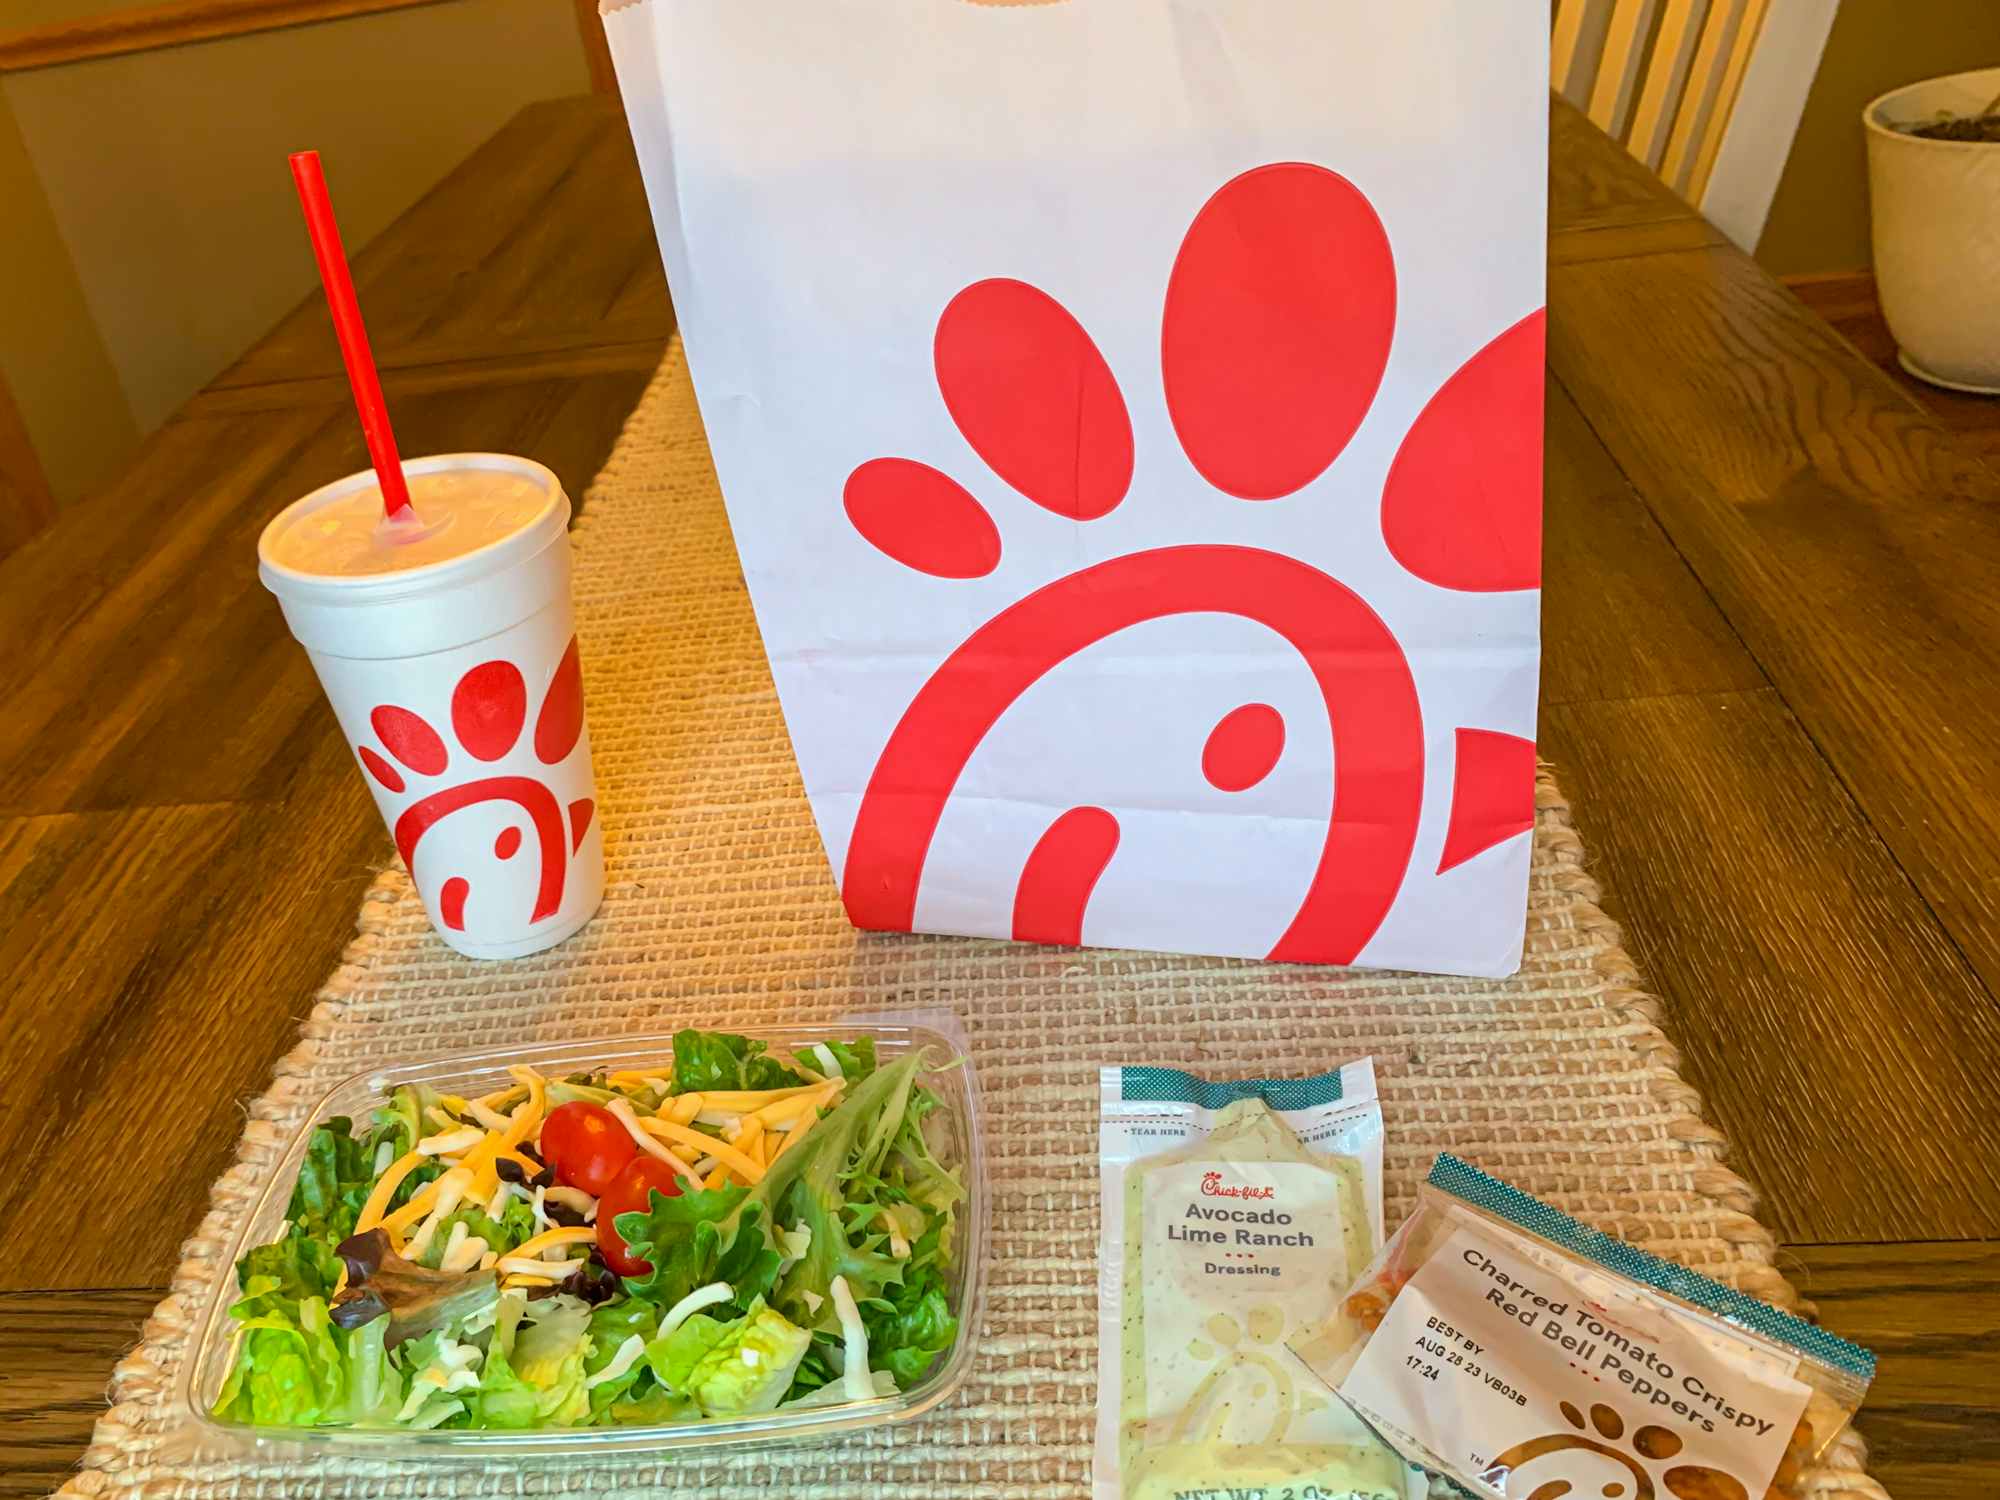 a chick fil a side salad sitting next to a chick fil a bag and drink